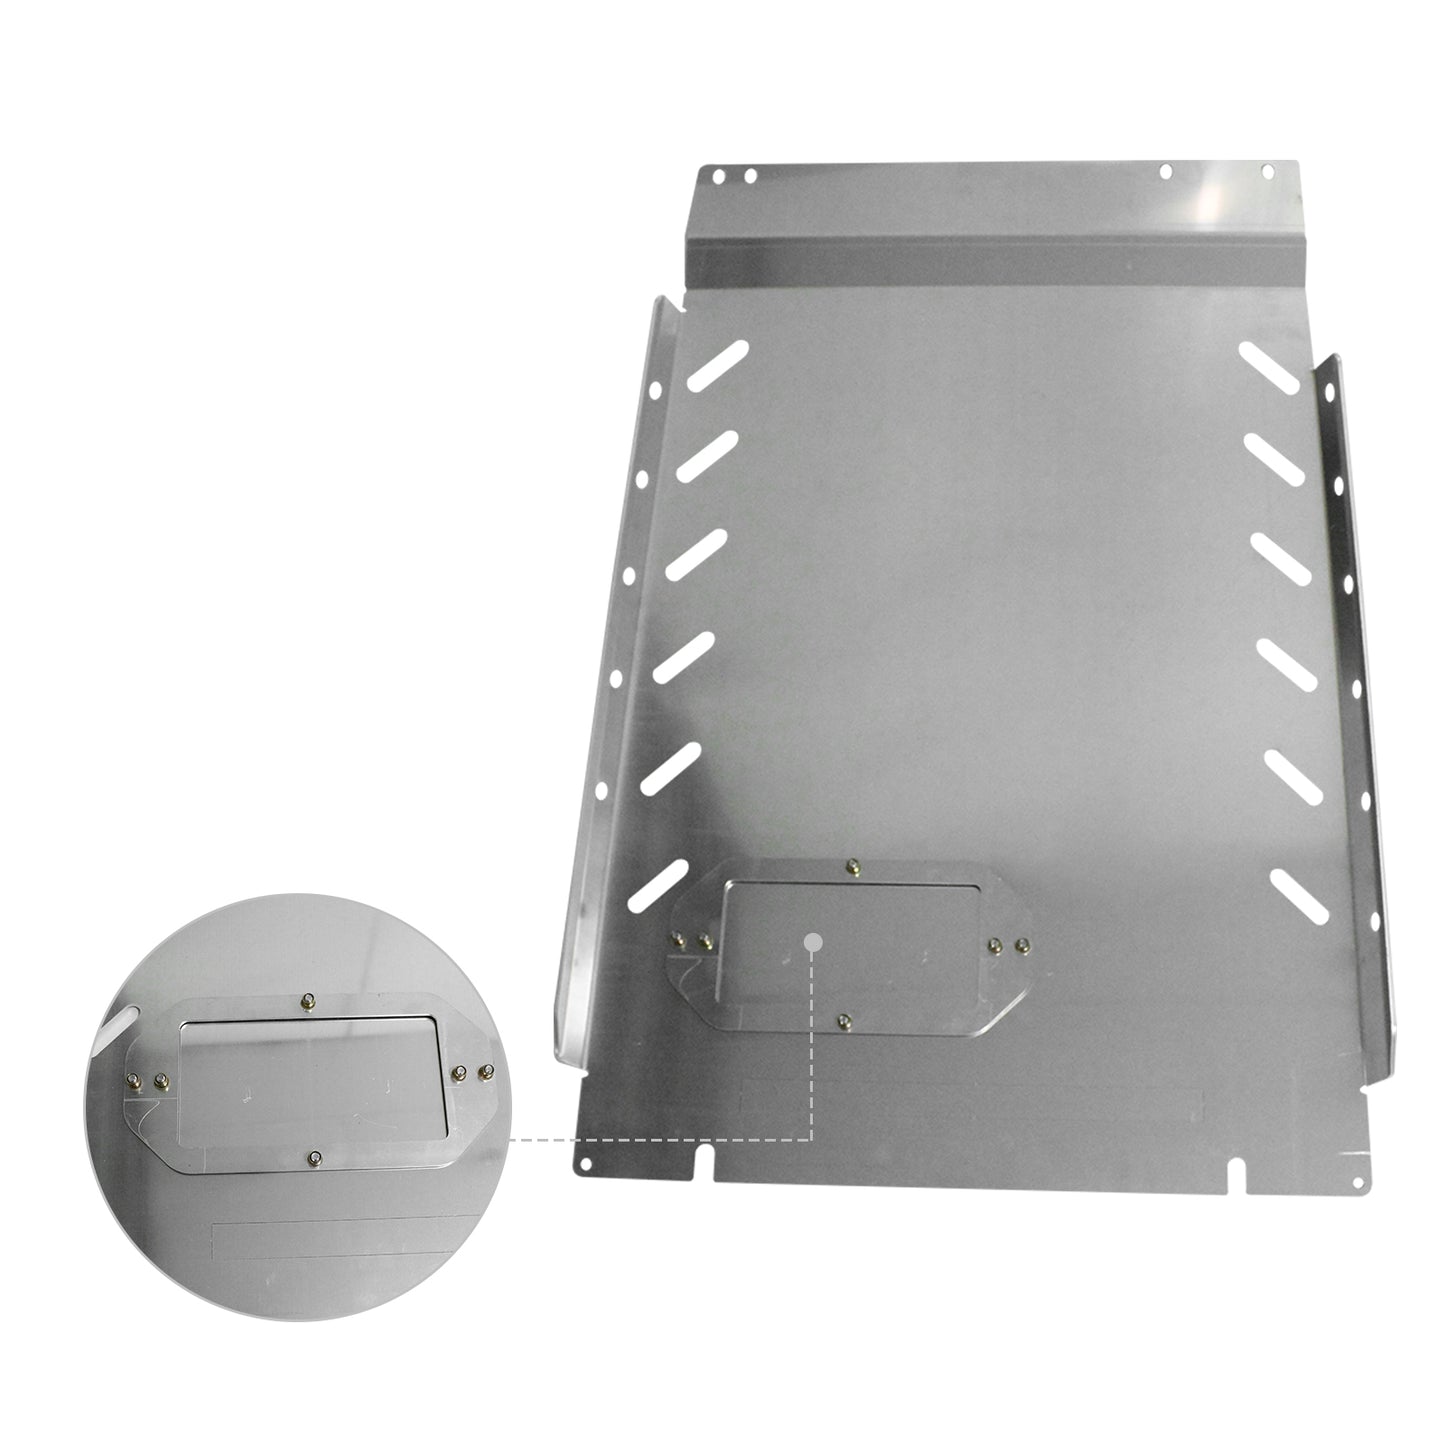 Aluminum Full Size Skid Plate Cover Shield For 2009-2014 Ford F-150 Off-Road Use